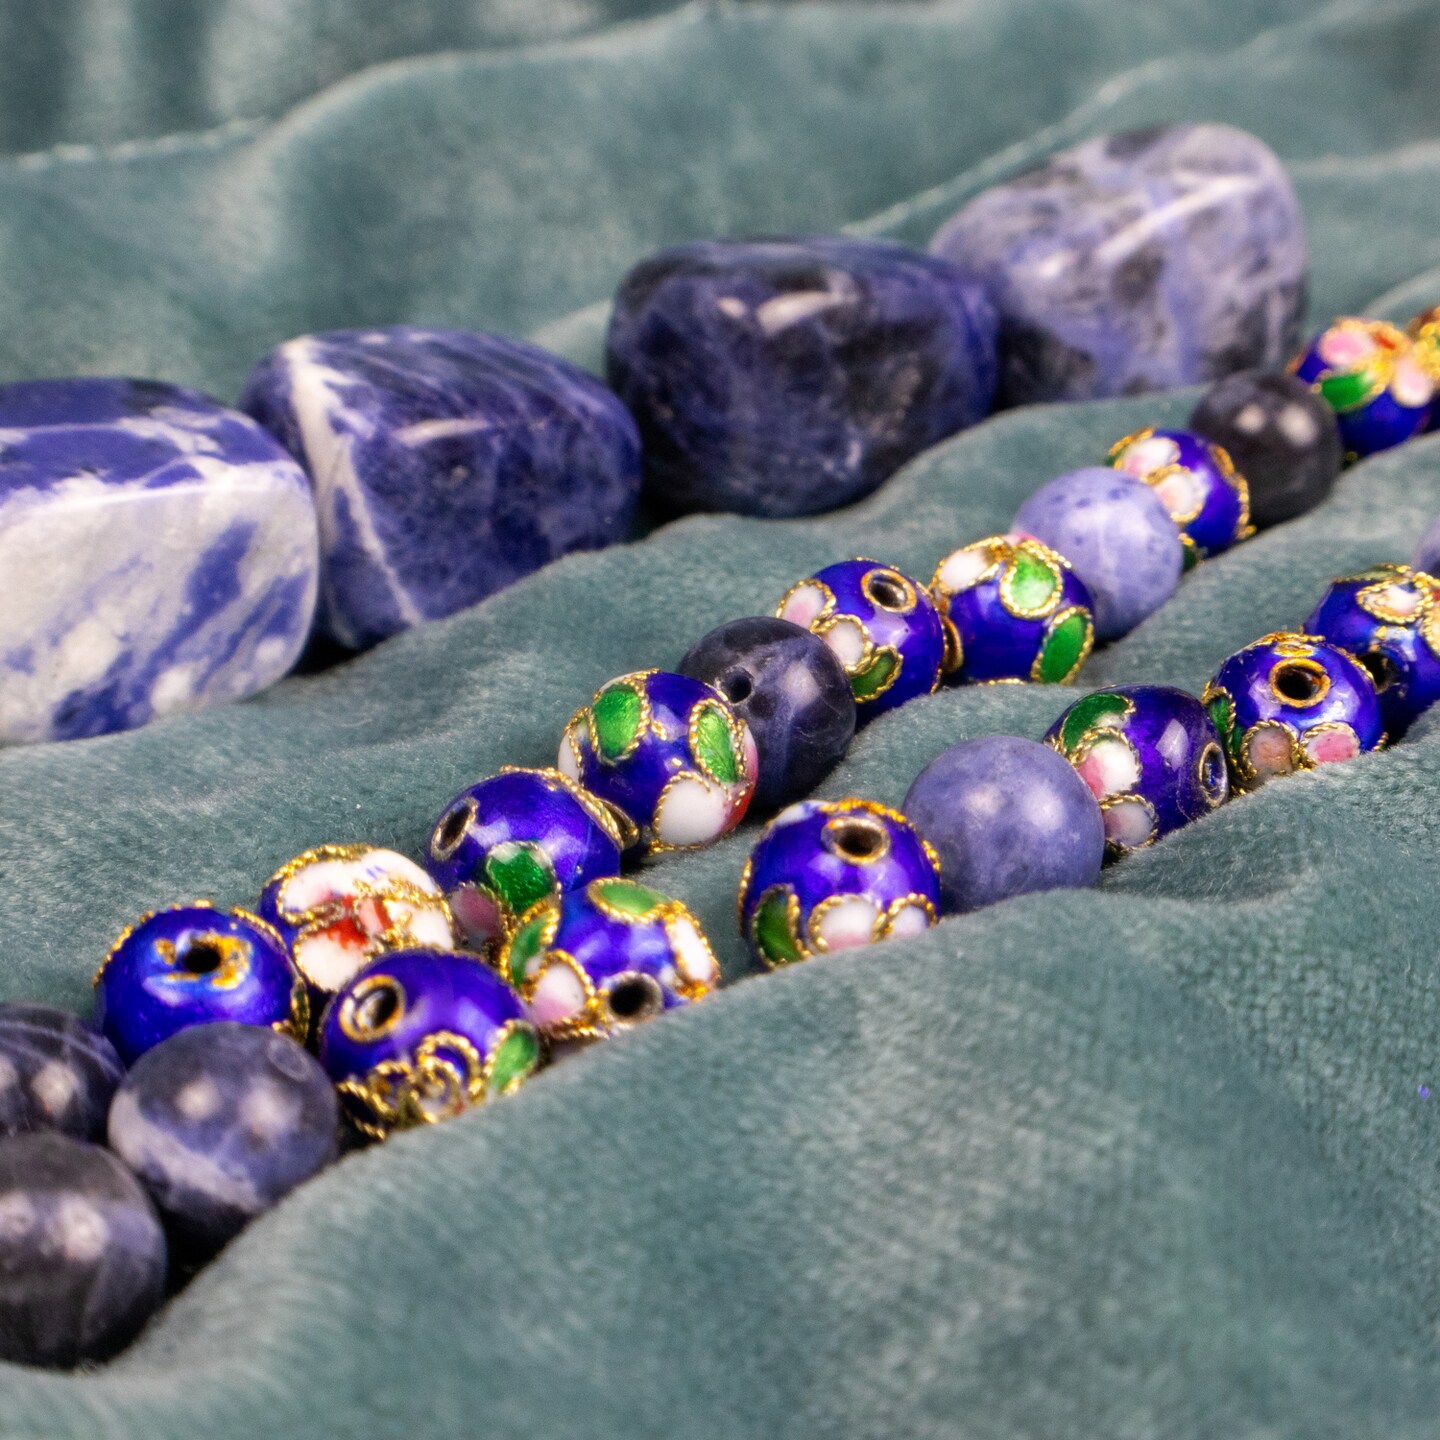 Cloisonne Beads Pack of 20